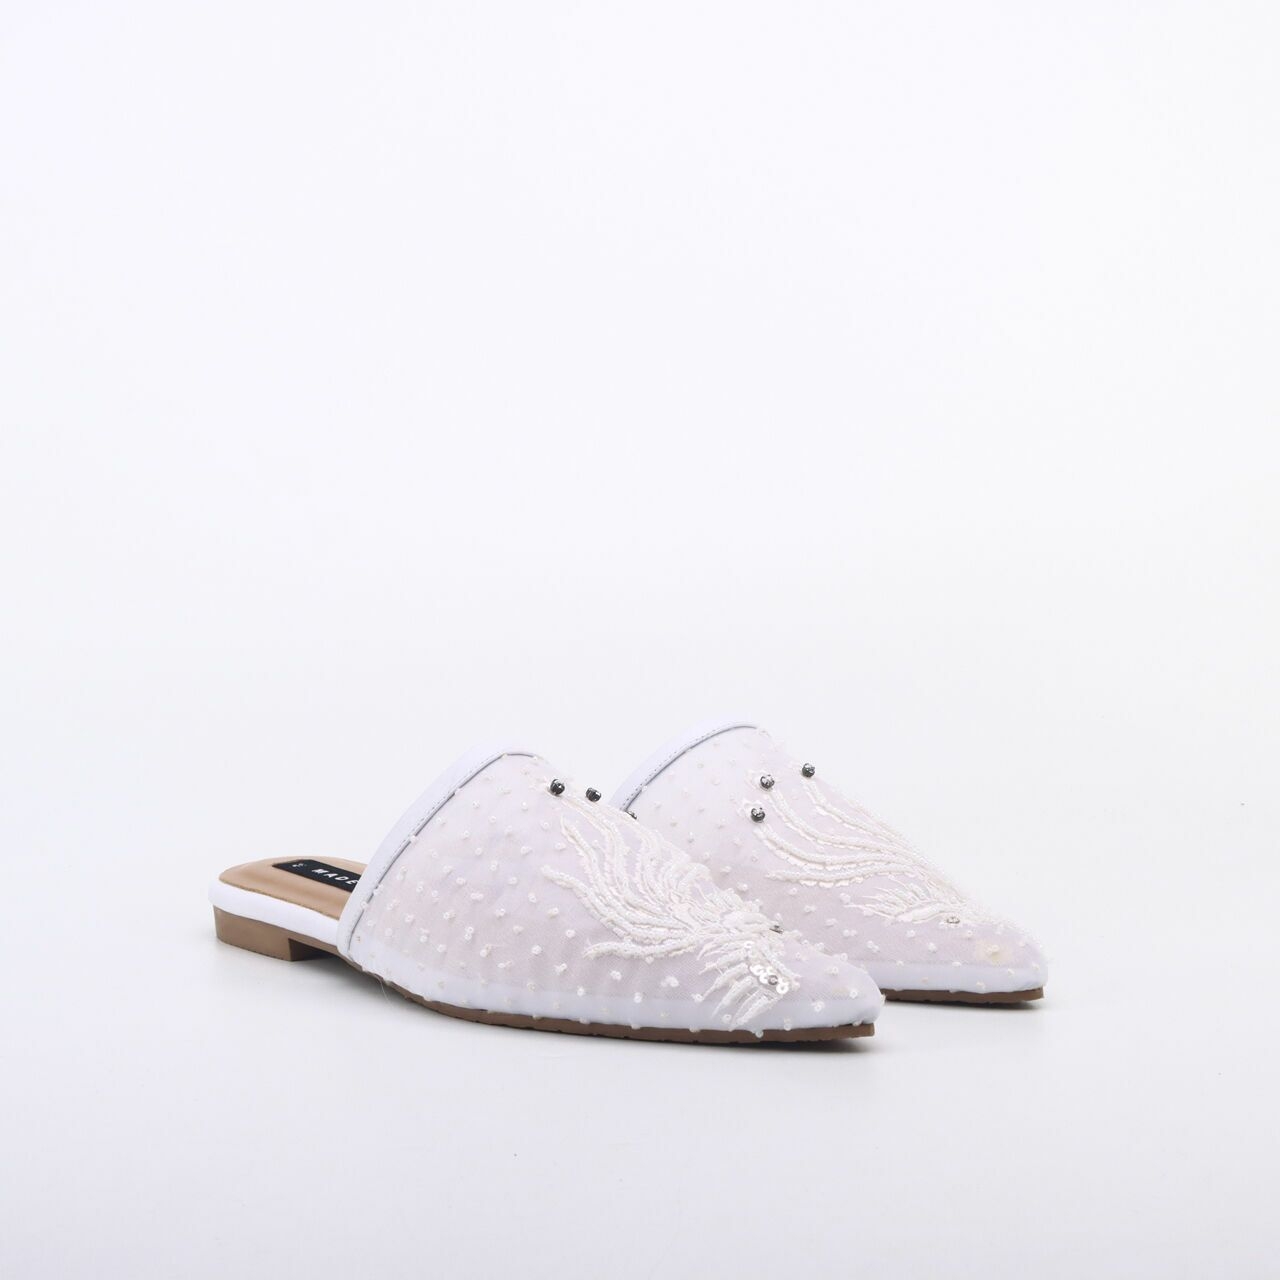 Mader White Mules Sandals